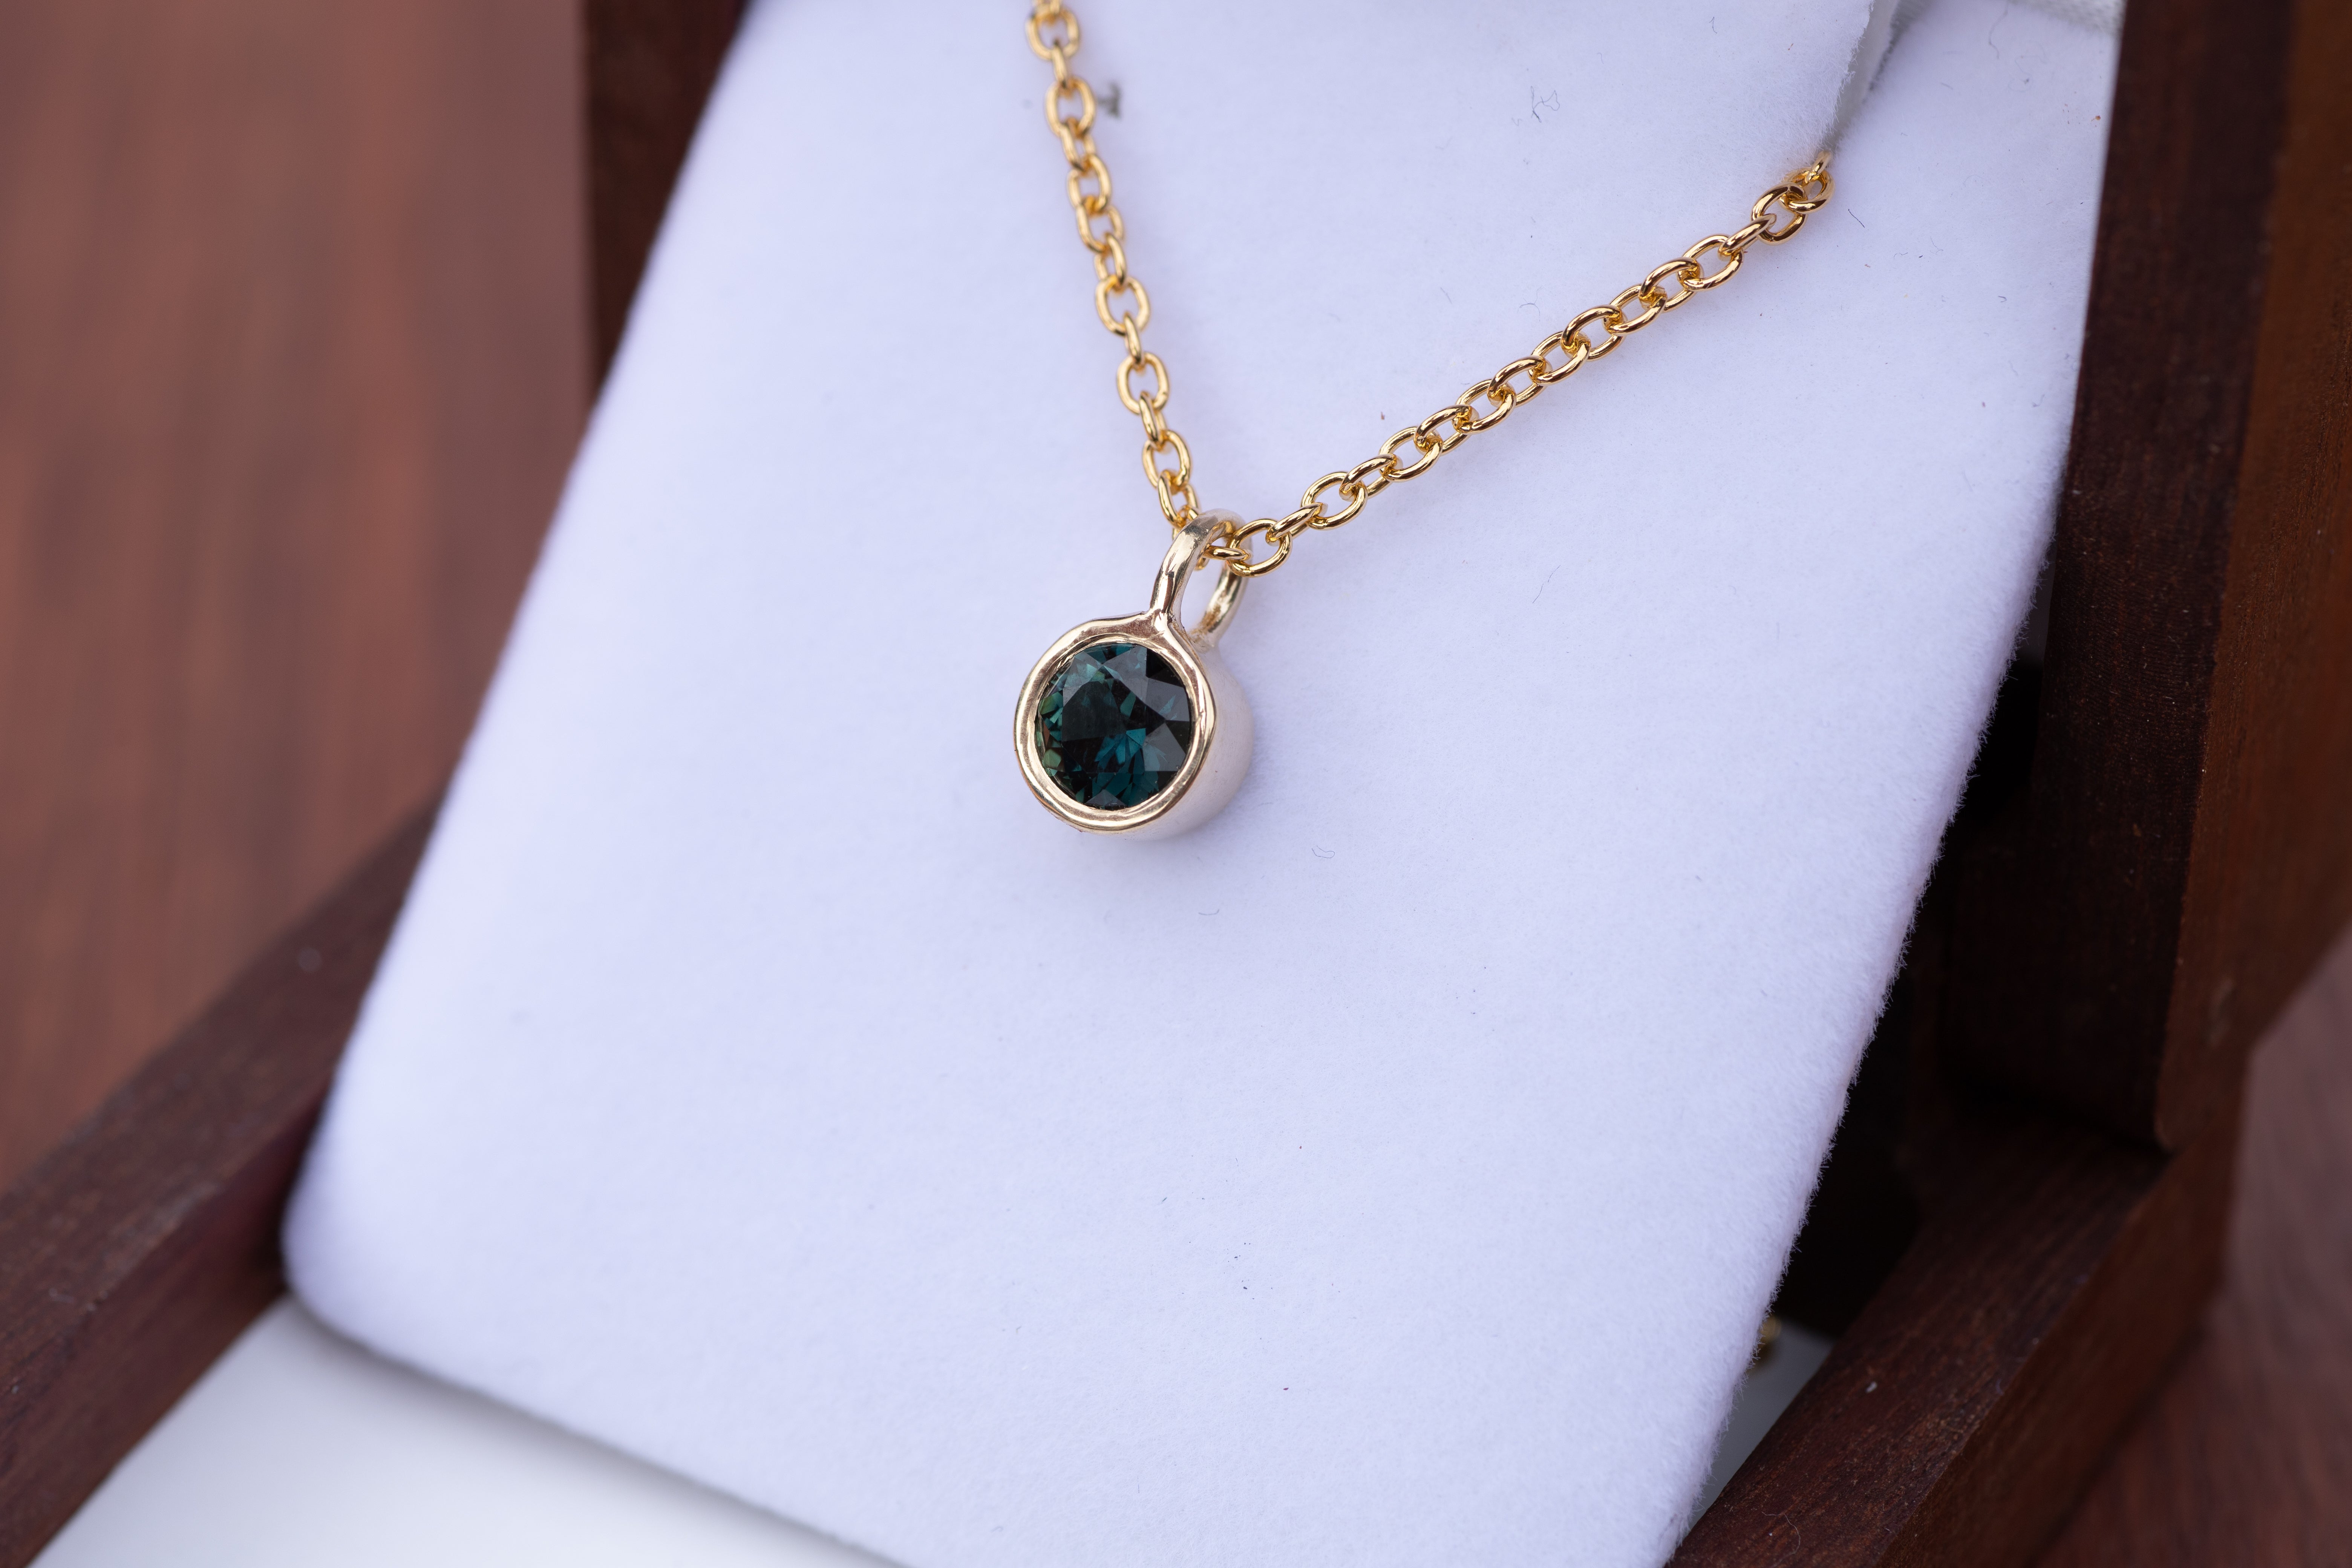 Teal sapphire pendant set in 9ct yellow gold & comes on 9ct yellow gold  chain — Lottie Jewellery